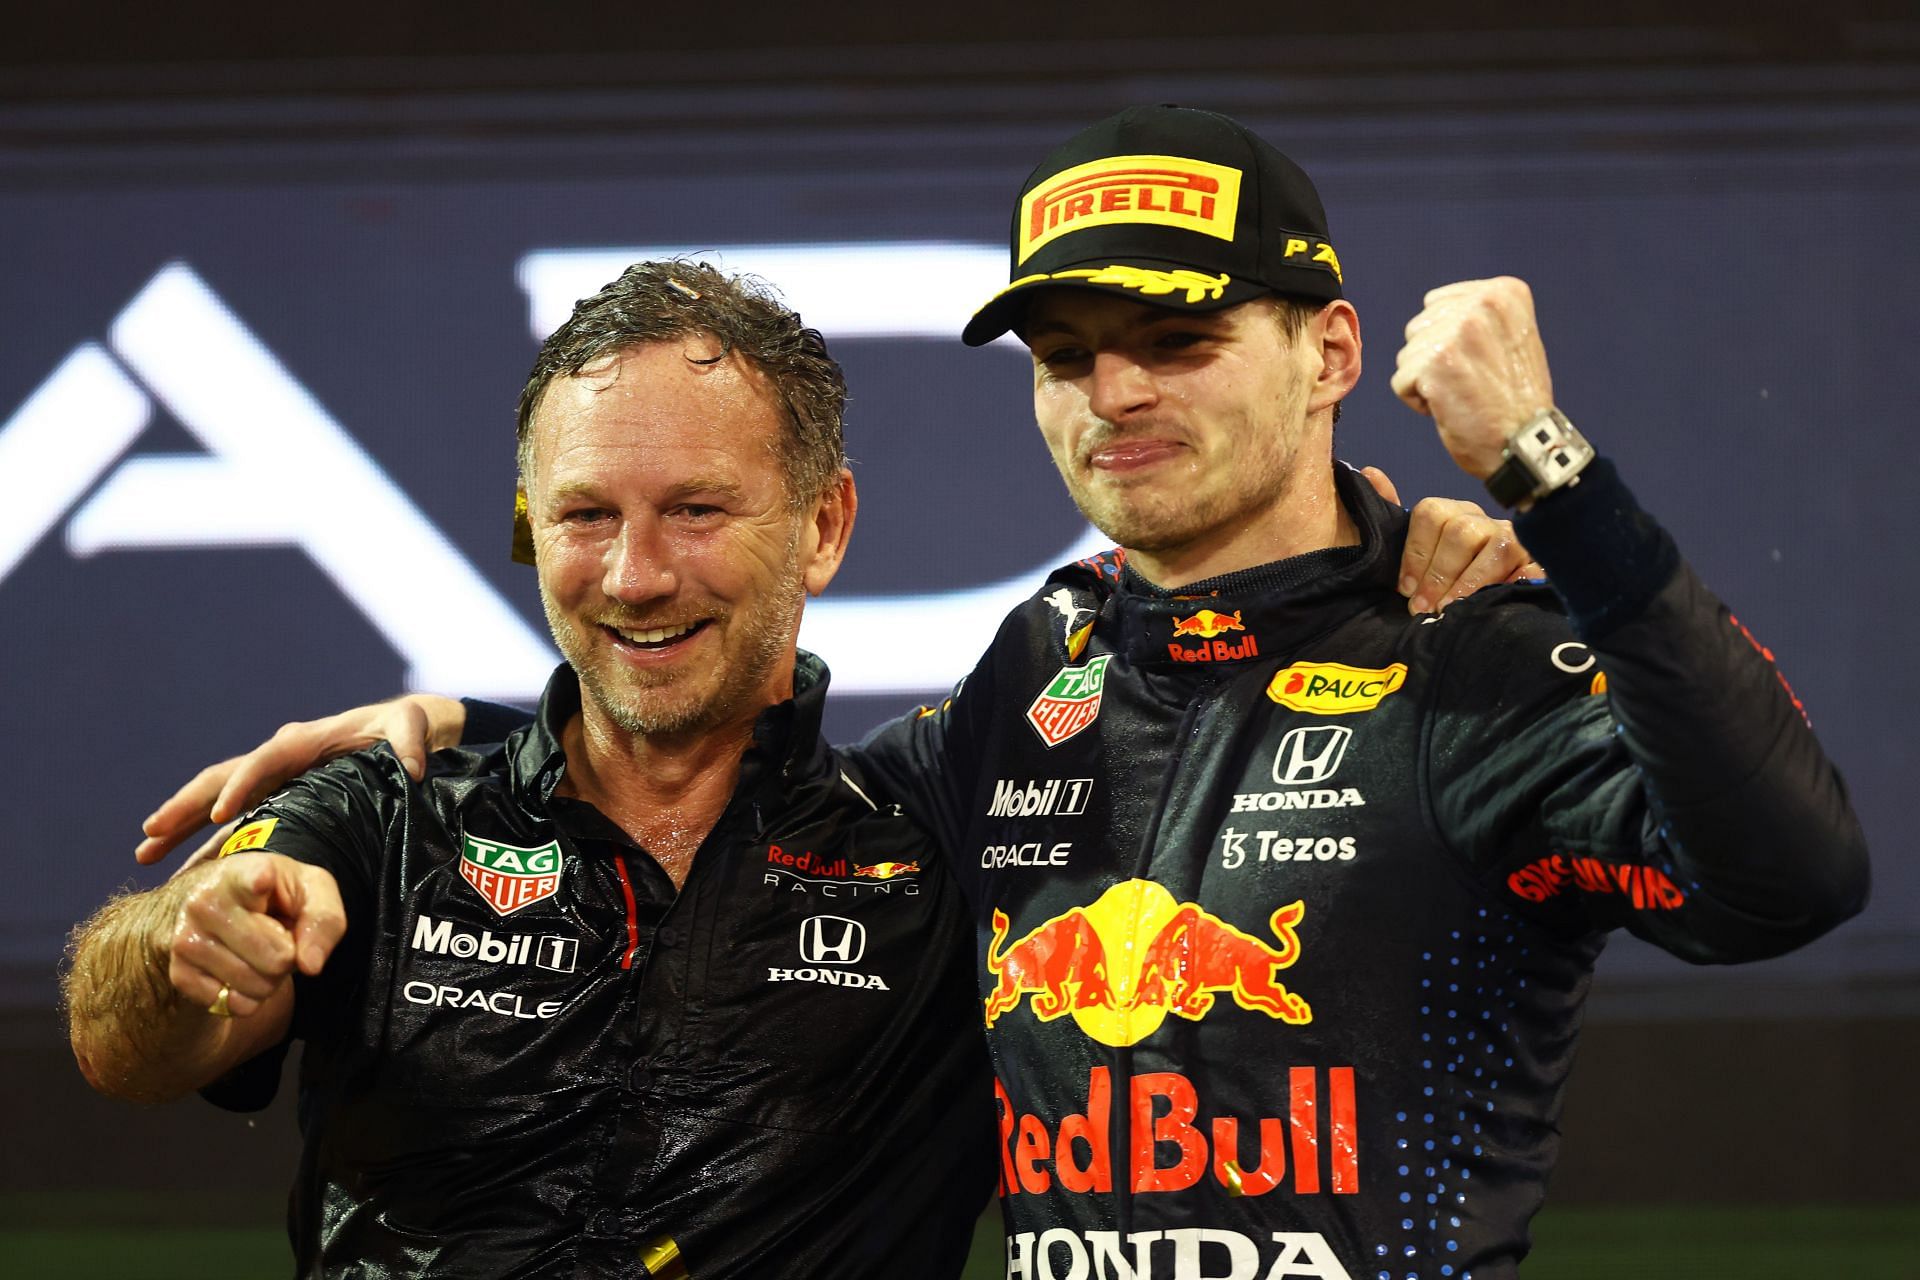 Red Bull team principal Christian Horner (left) and driver Max Verstappen (right) celebrate on the podium at the 2021 F1 Abu Dhabi Grand Prix (Photo by Bryn Lennon/Getty Images)